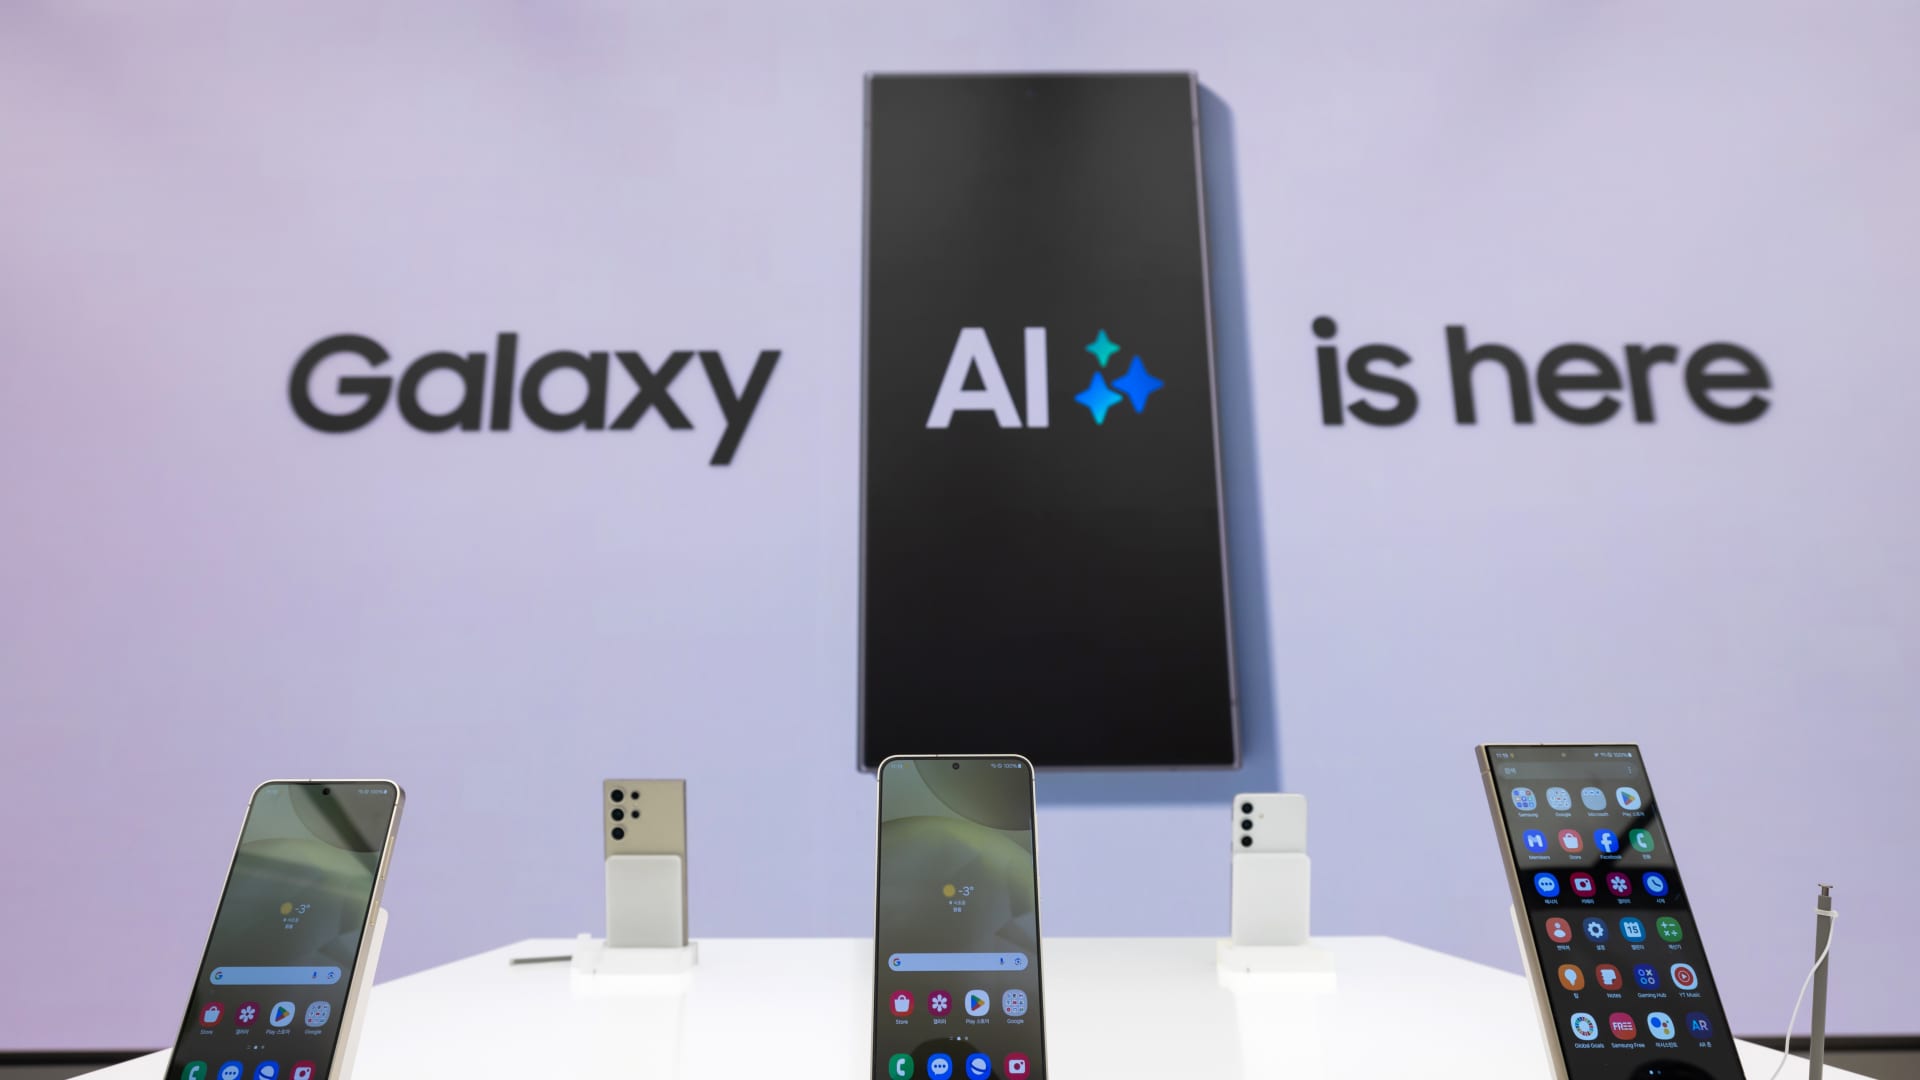 Samsung says it needs to ‘redefine’ its voice assistant Bixby with generative AI upgrade